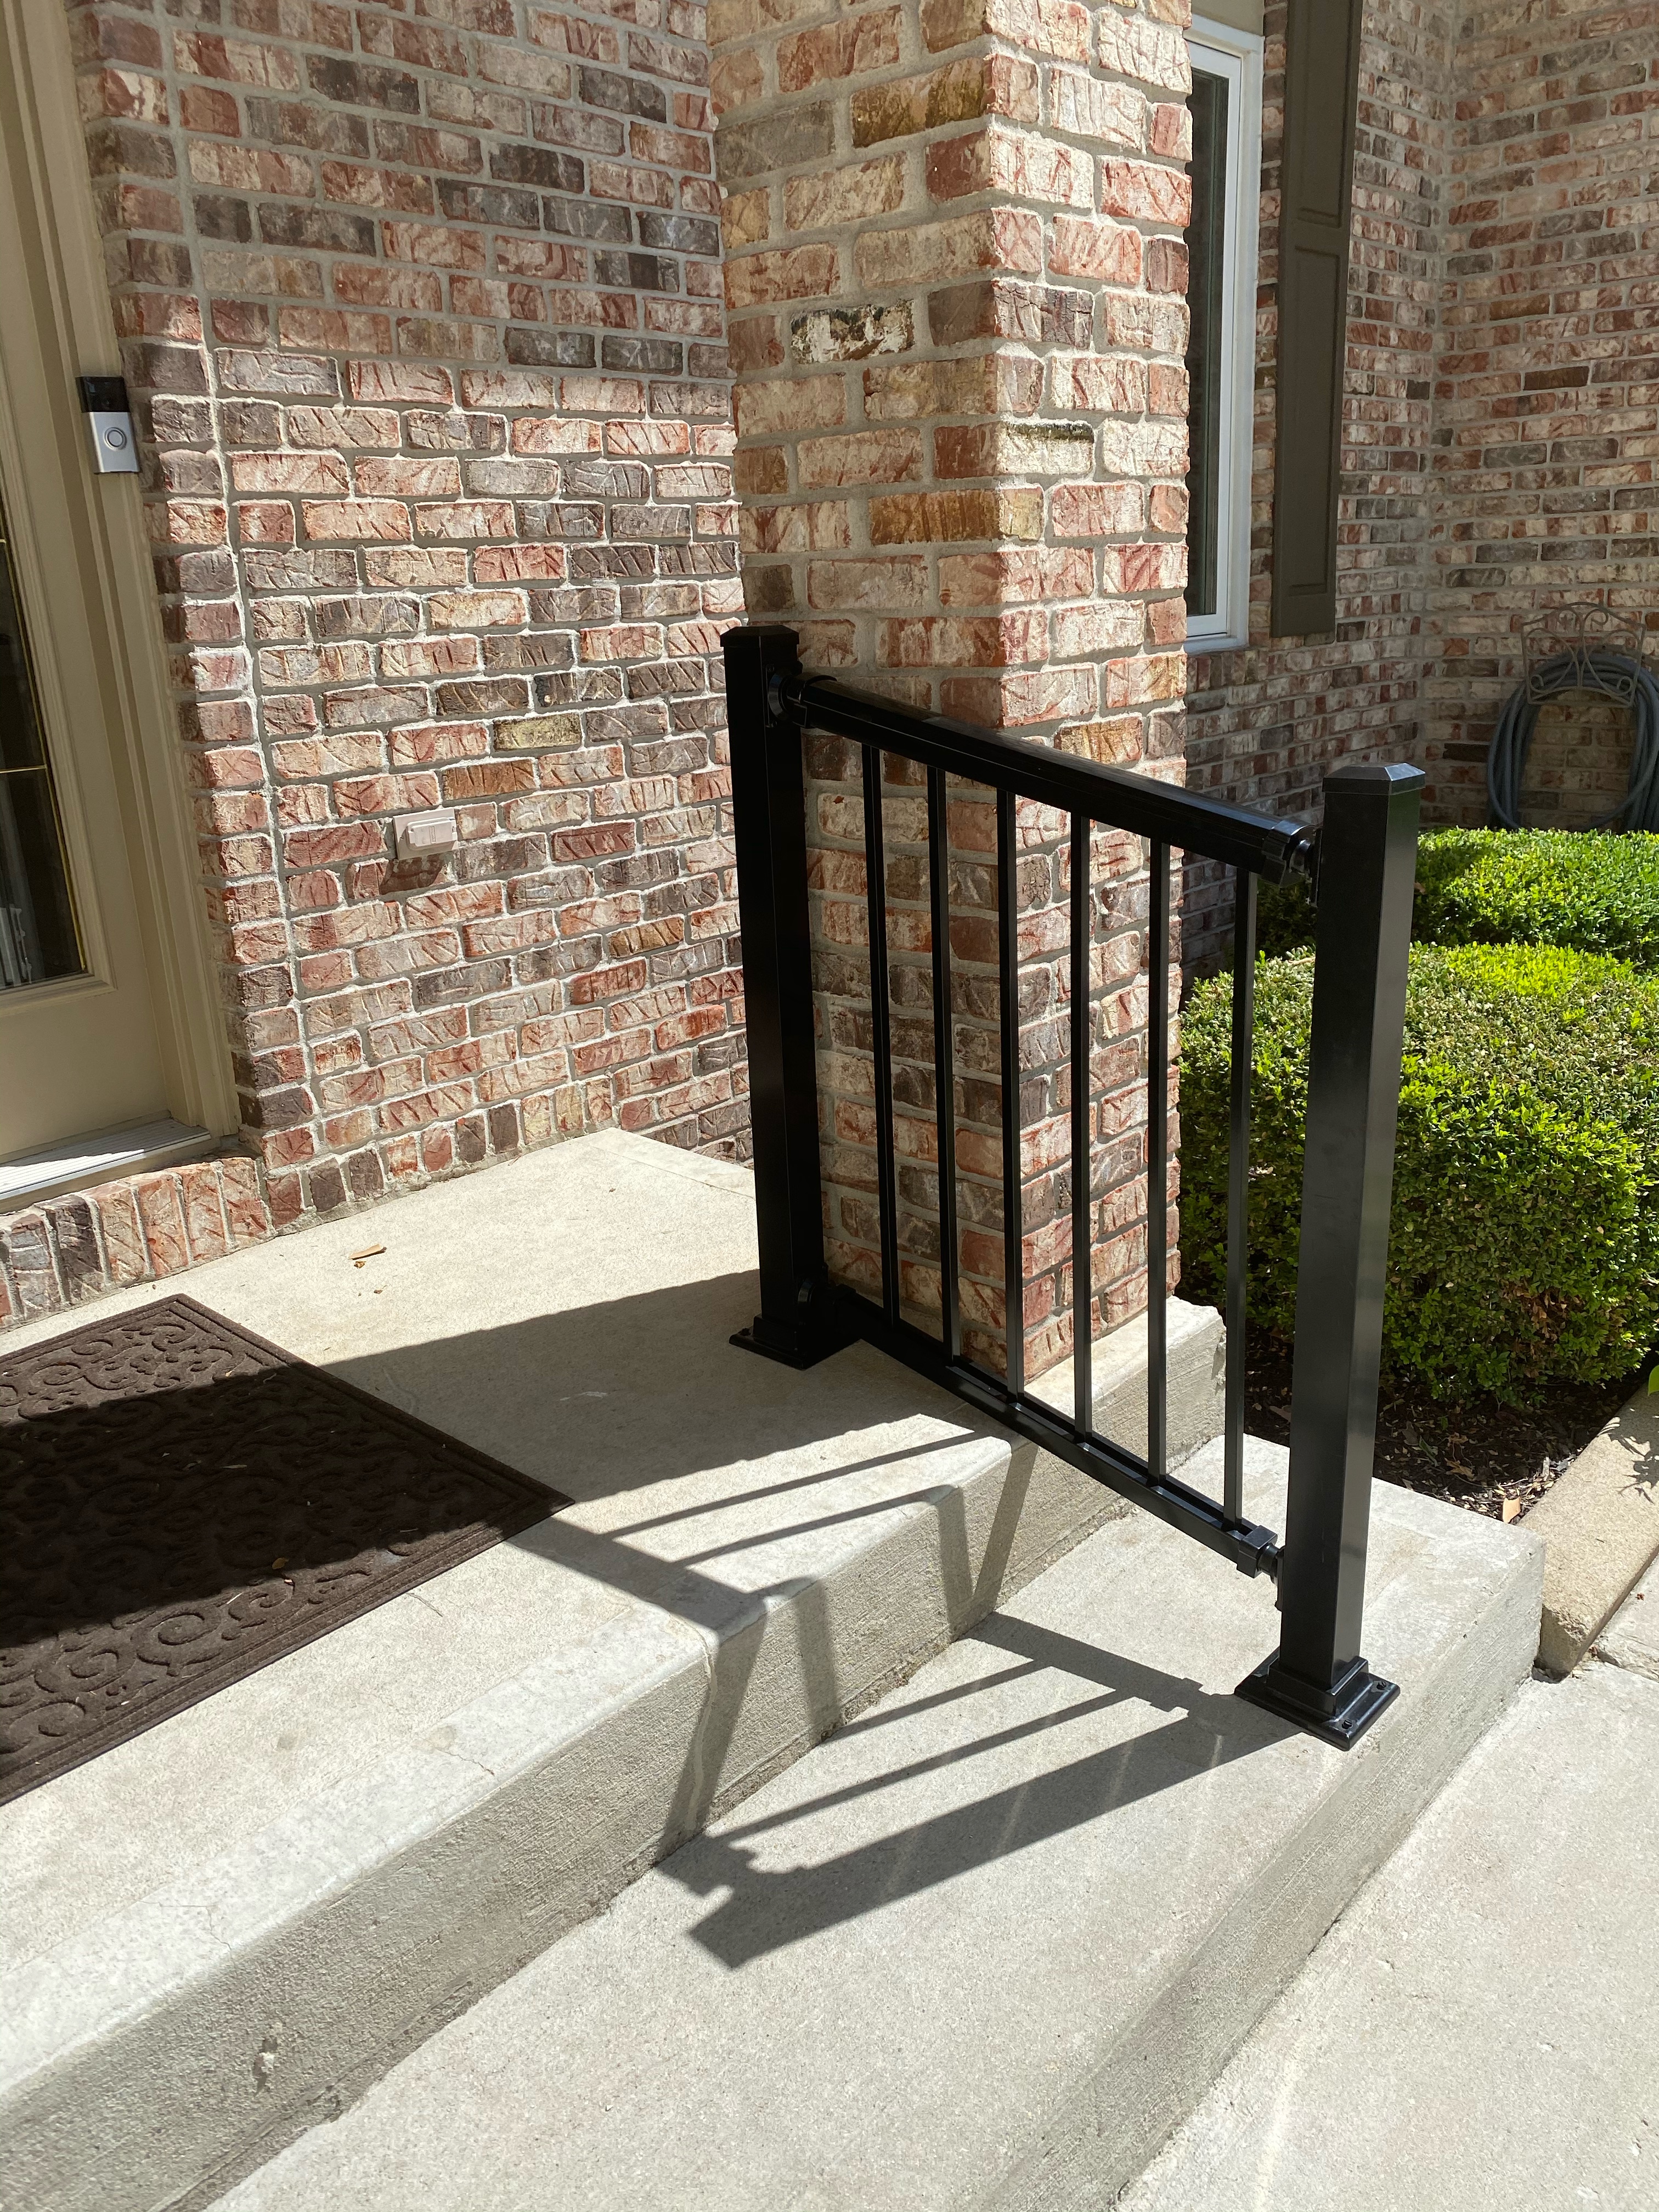 black aluminum handrail installed near front steps for additional support while navigating in and out of home